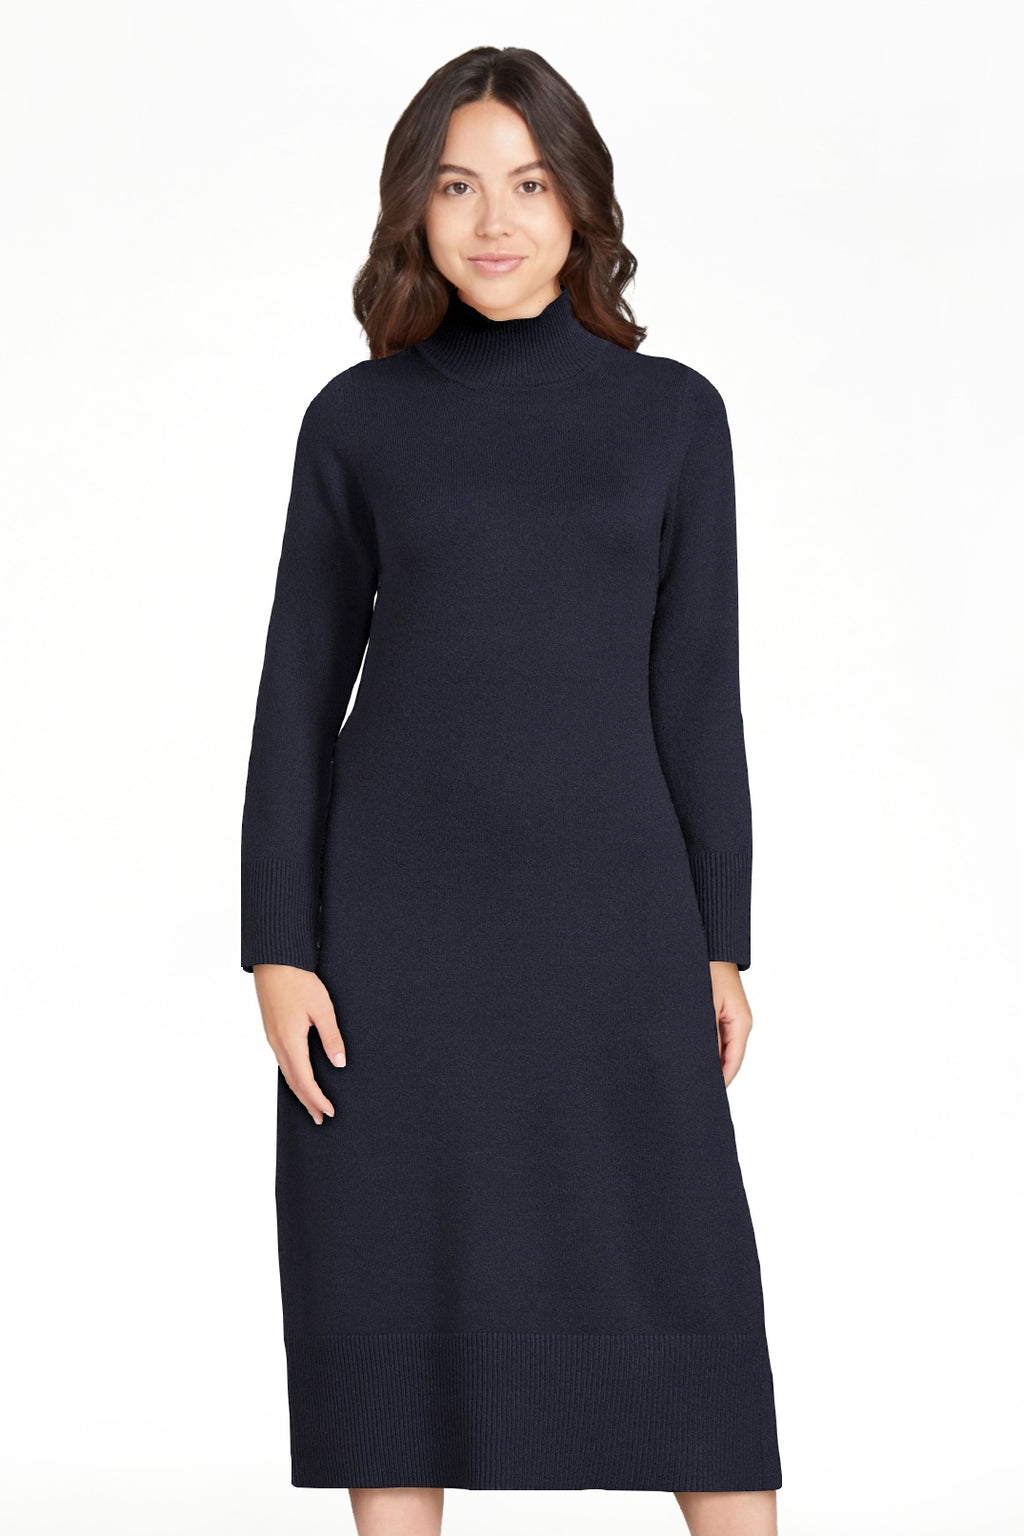 Free Assembly Women’s Turtleneck Sweater Midi Dress with Long Sleeves, Sizes XS-XXXL - image 1 of 10